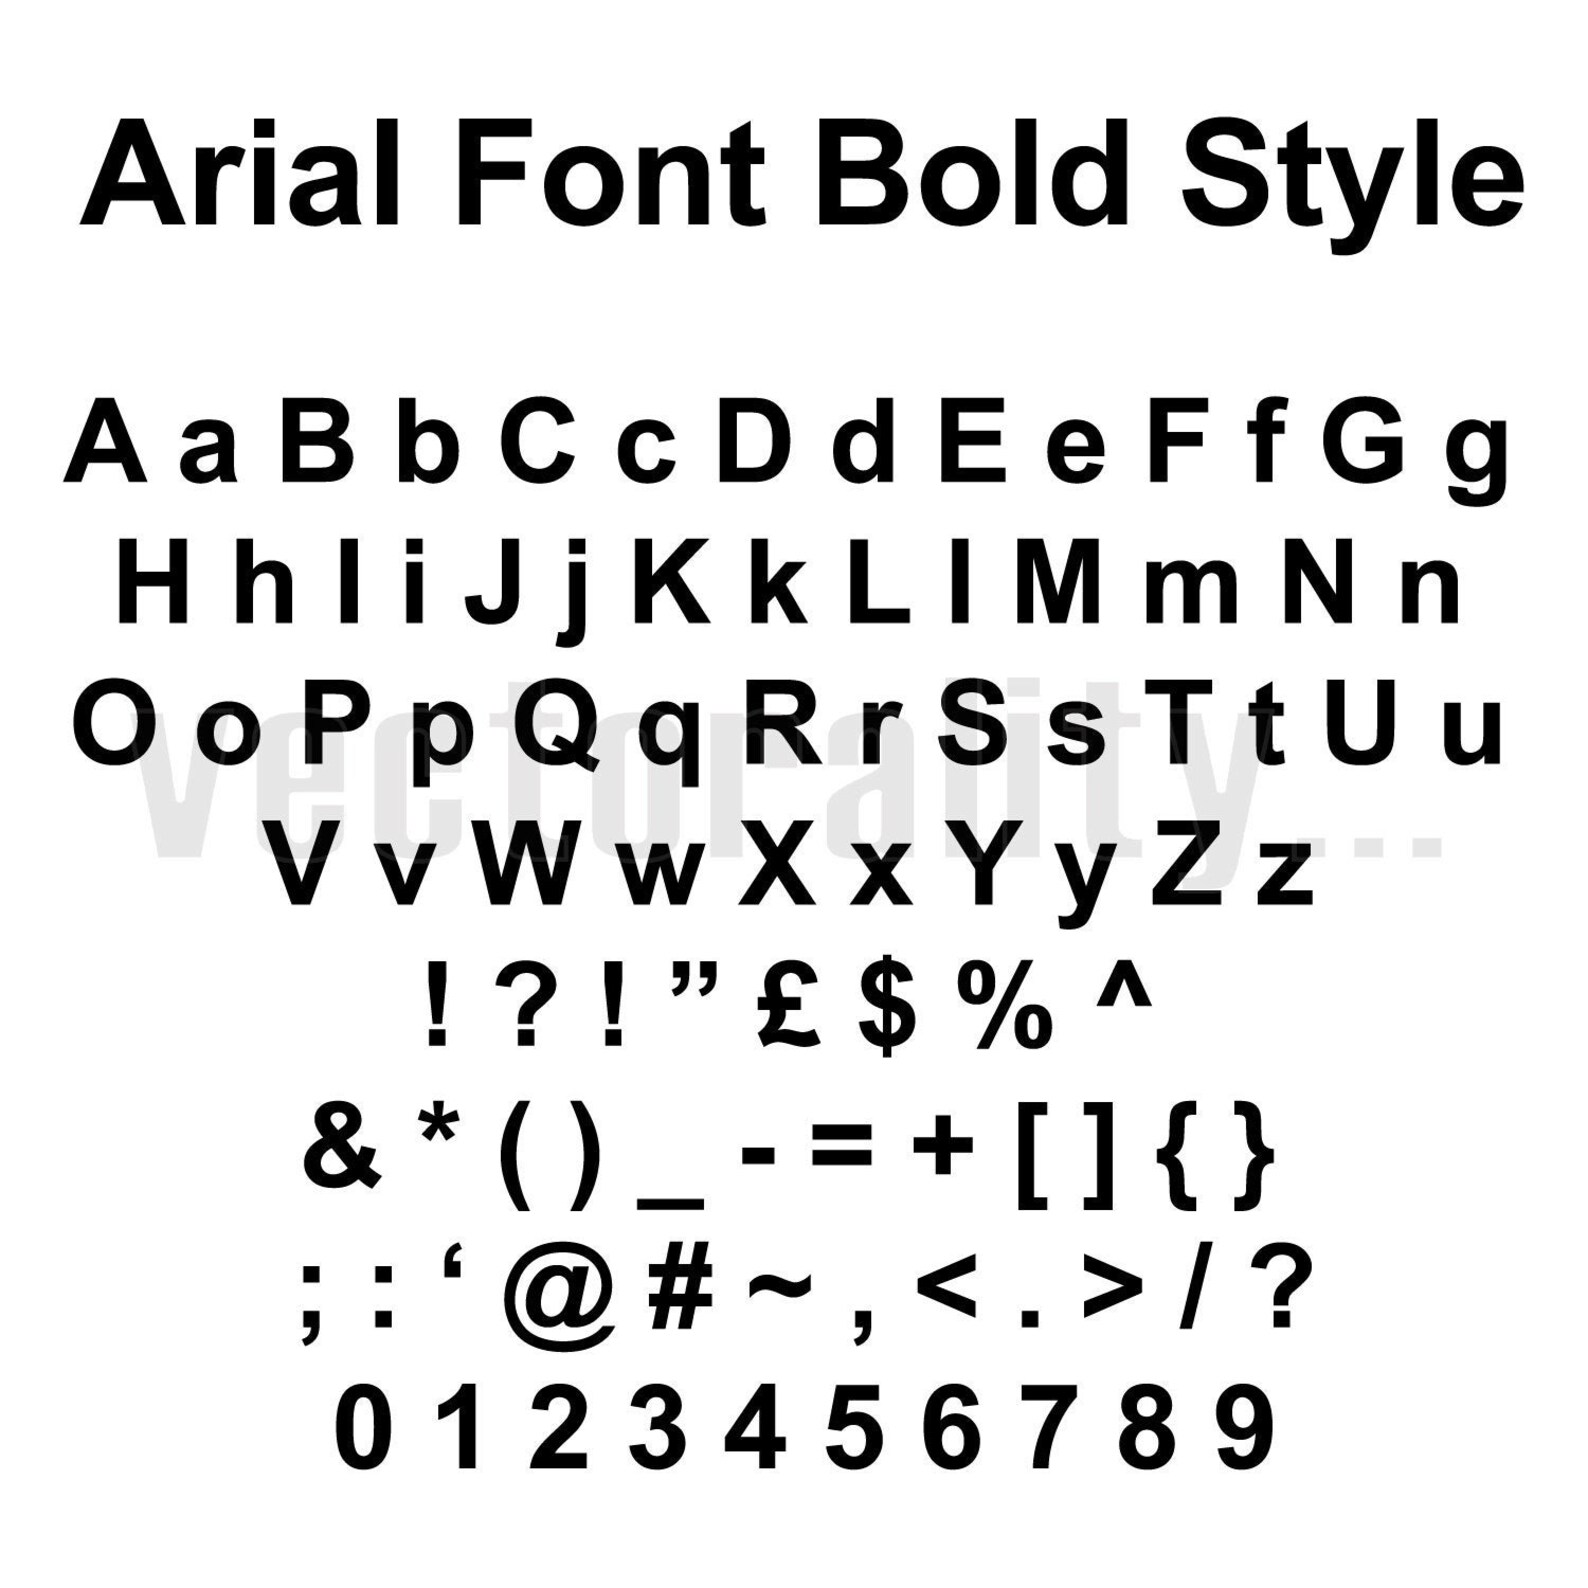 Шрифт arial bold